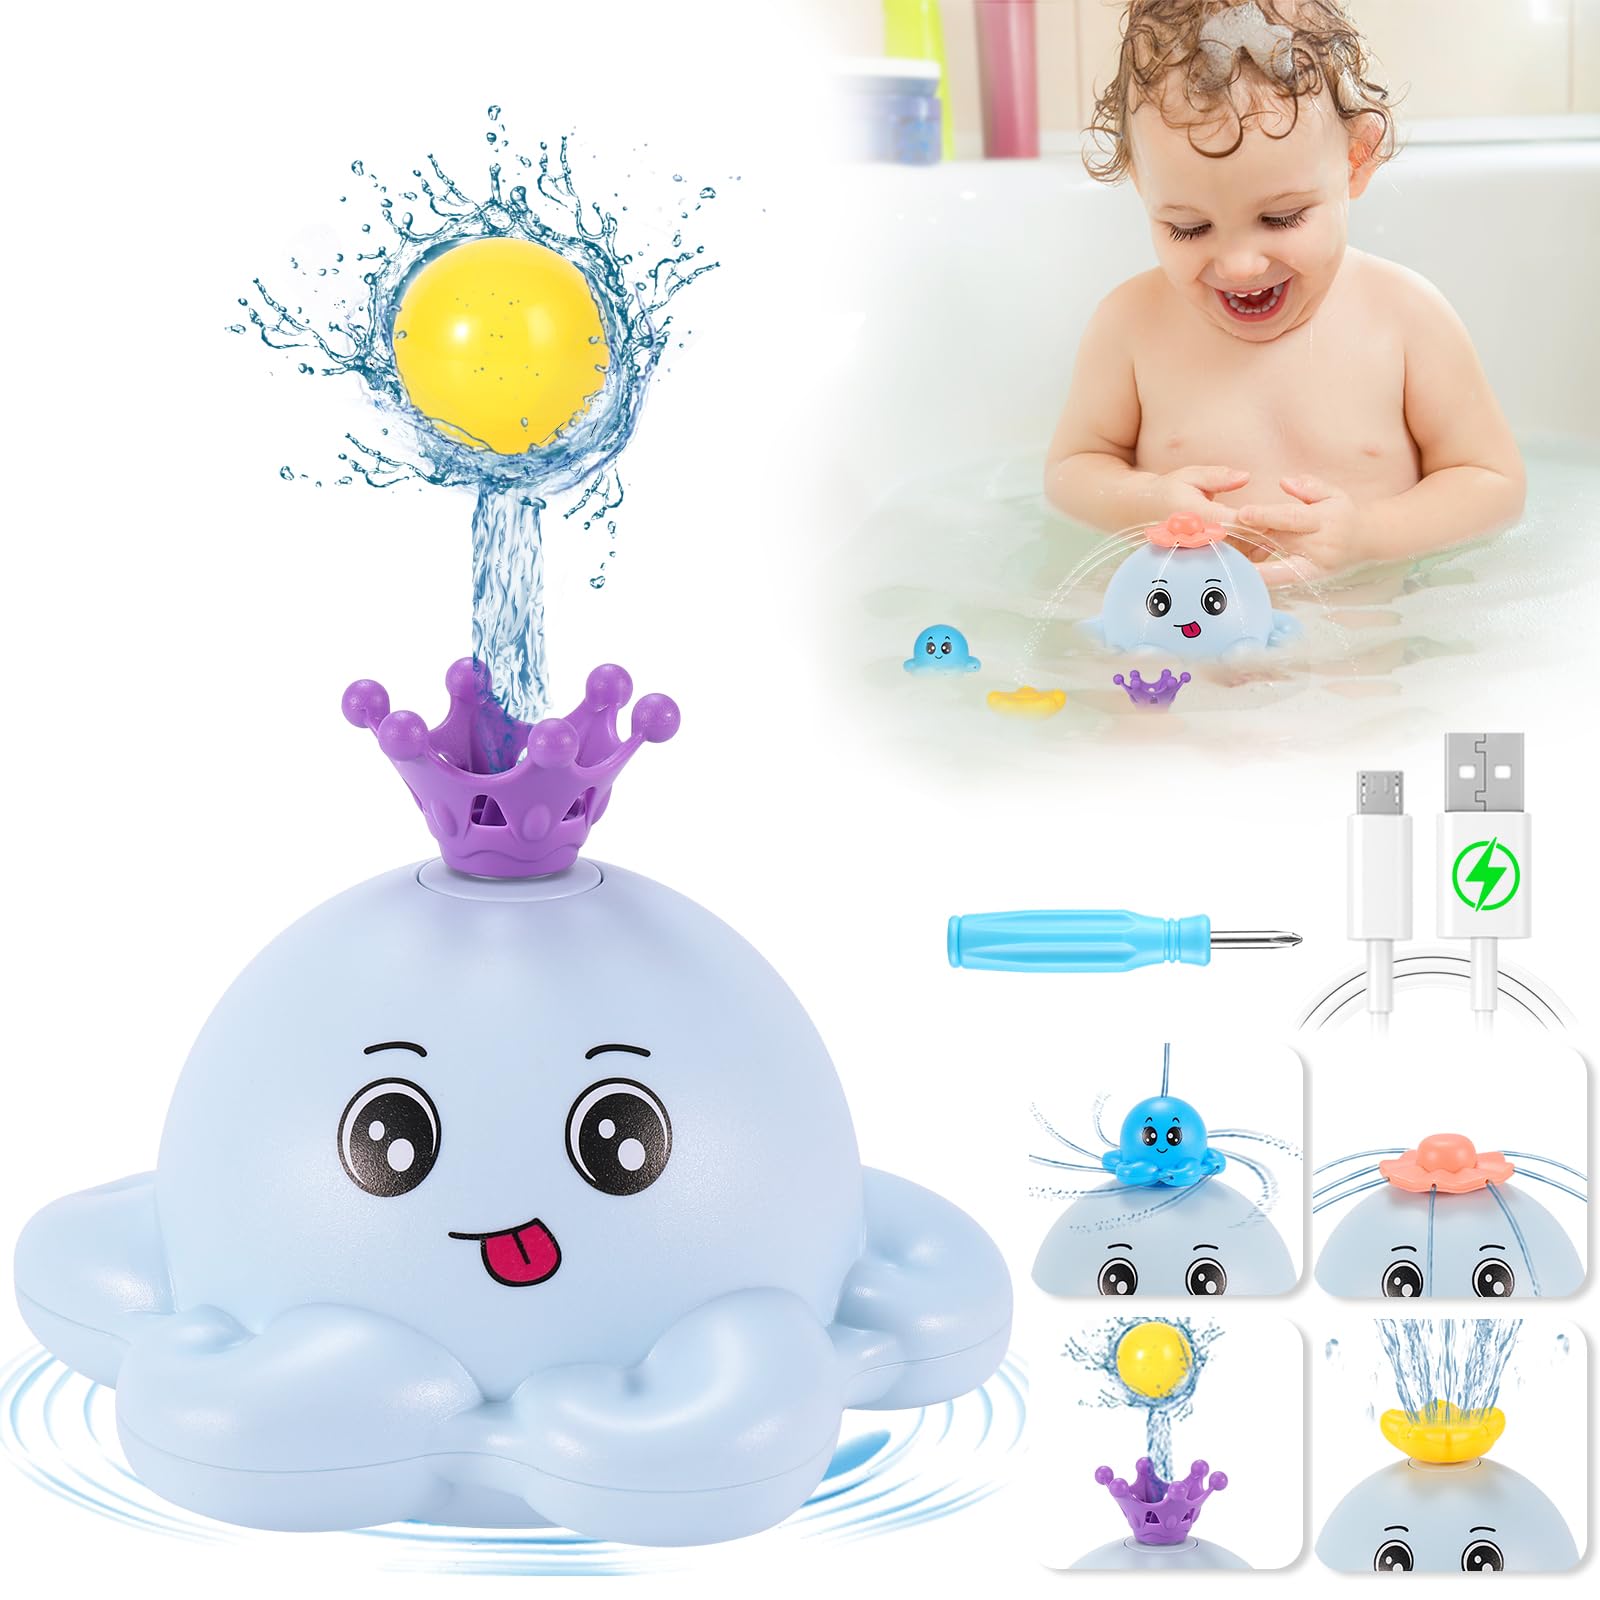 Octopus Bath Toys Rechargeable Kids With 4 Modes-Blue - Gigilli